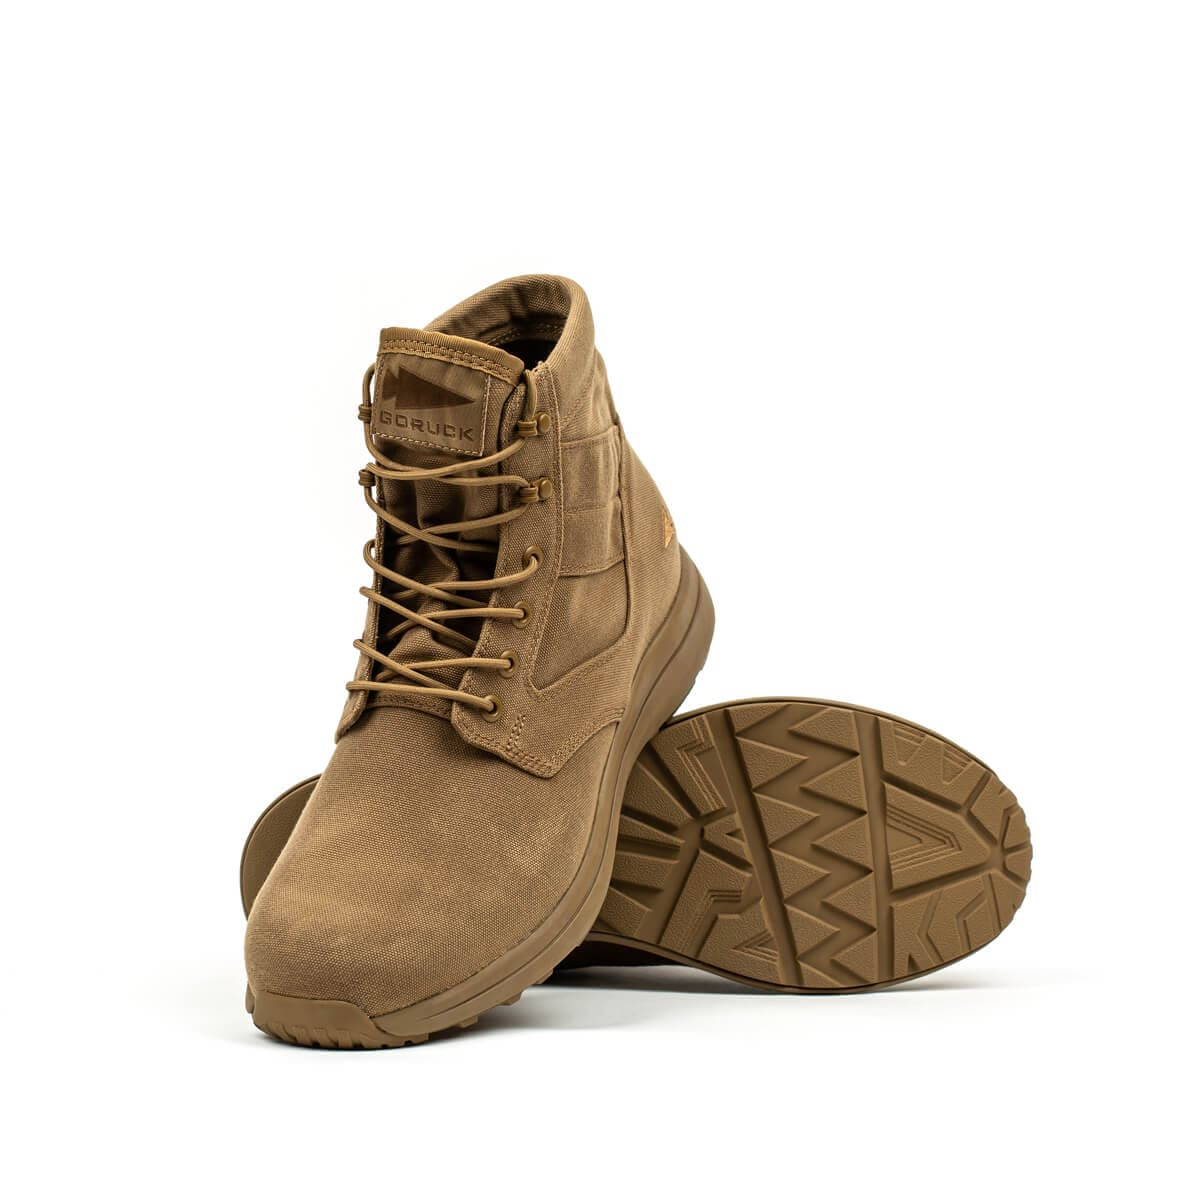 Jedburgh Rucking Boots - Mid Top - Coyote